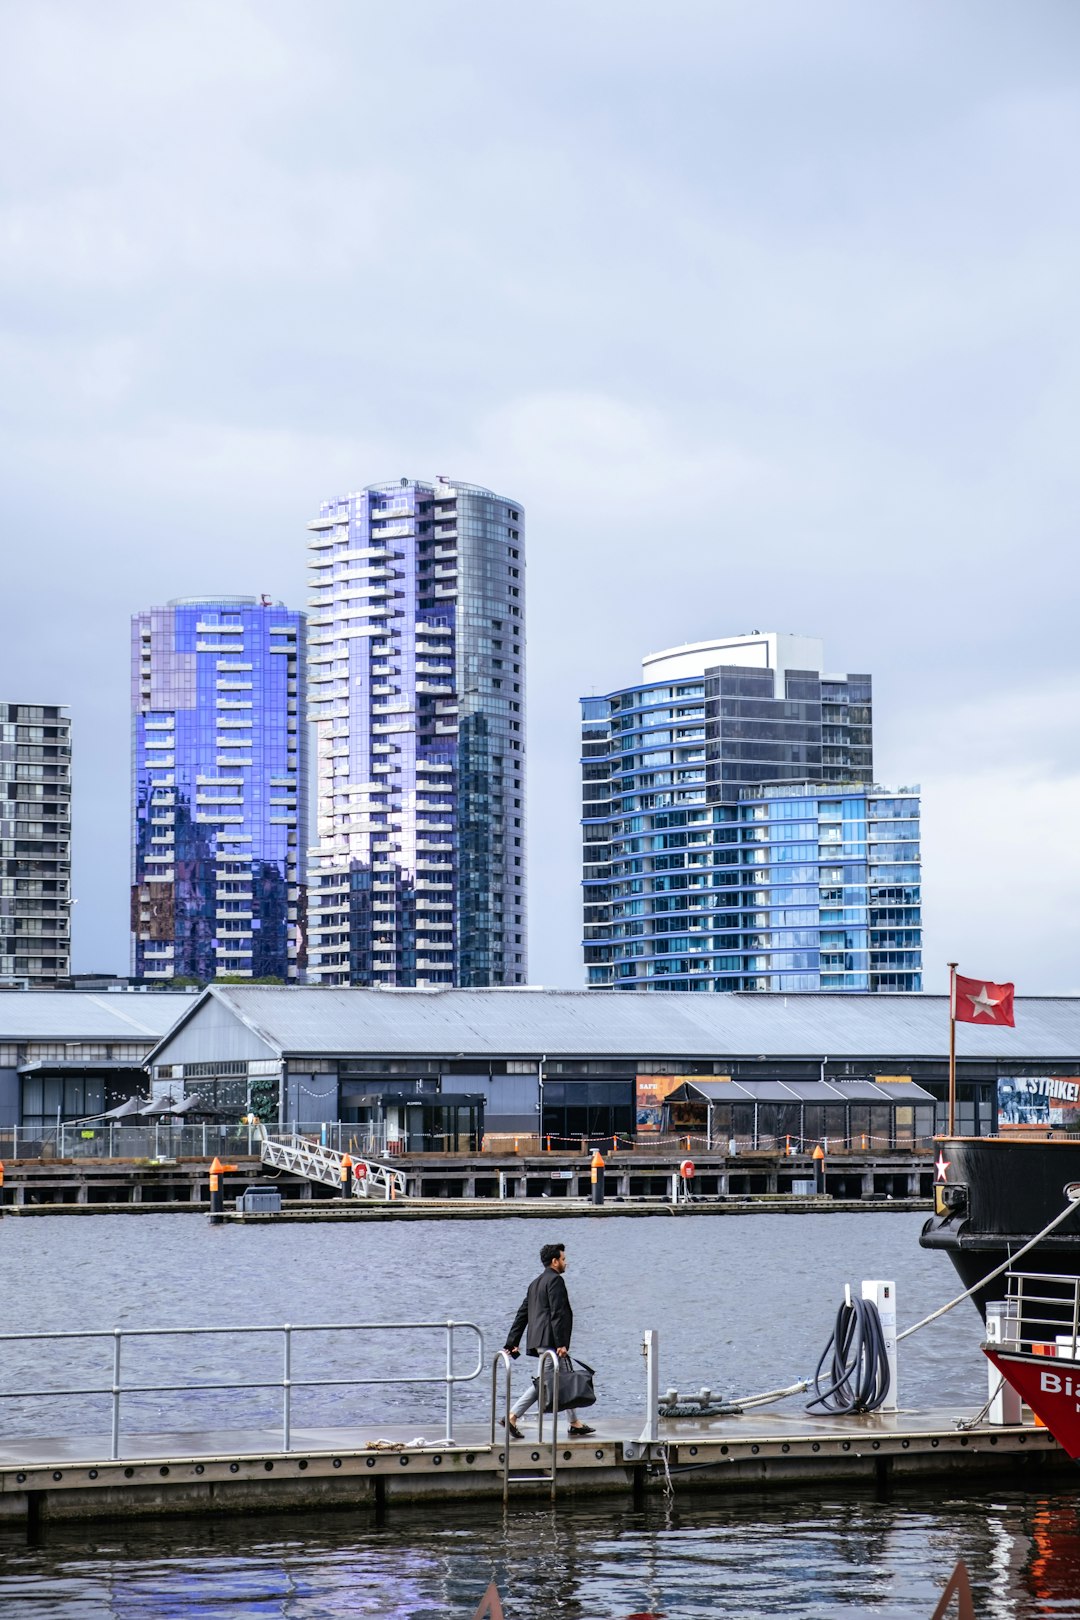 Travel Tips and Stories of Docklands in Australia